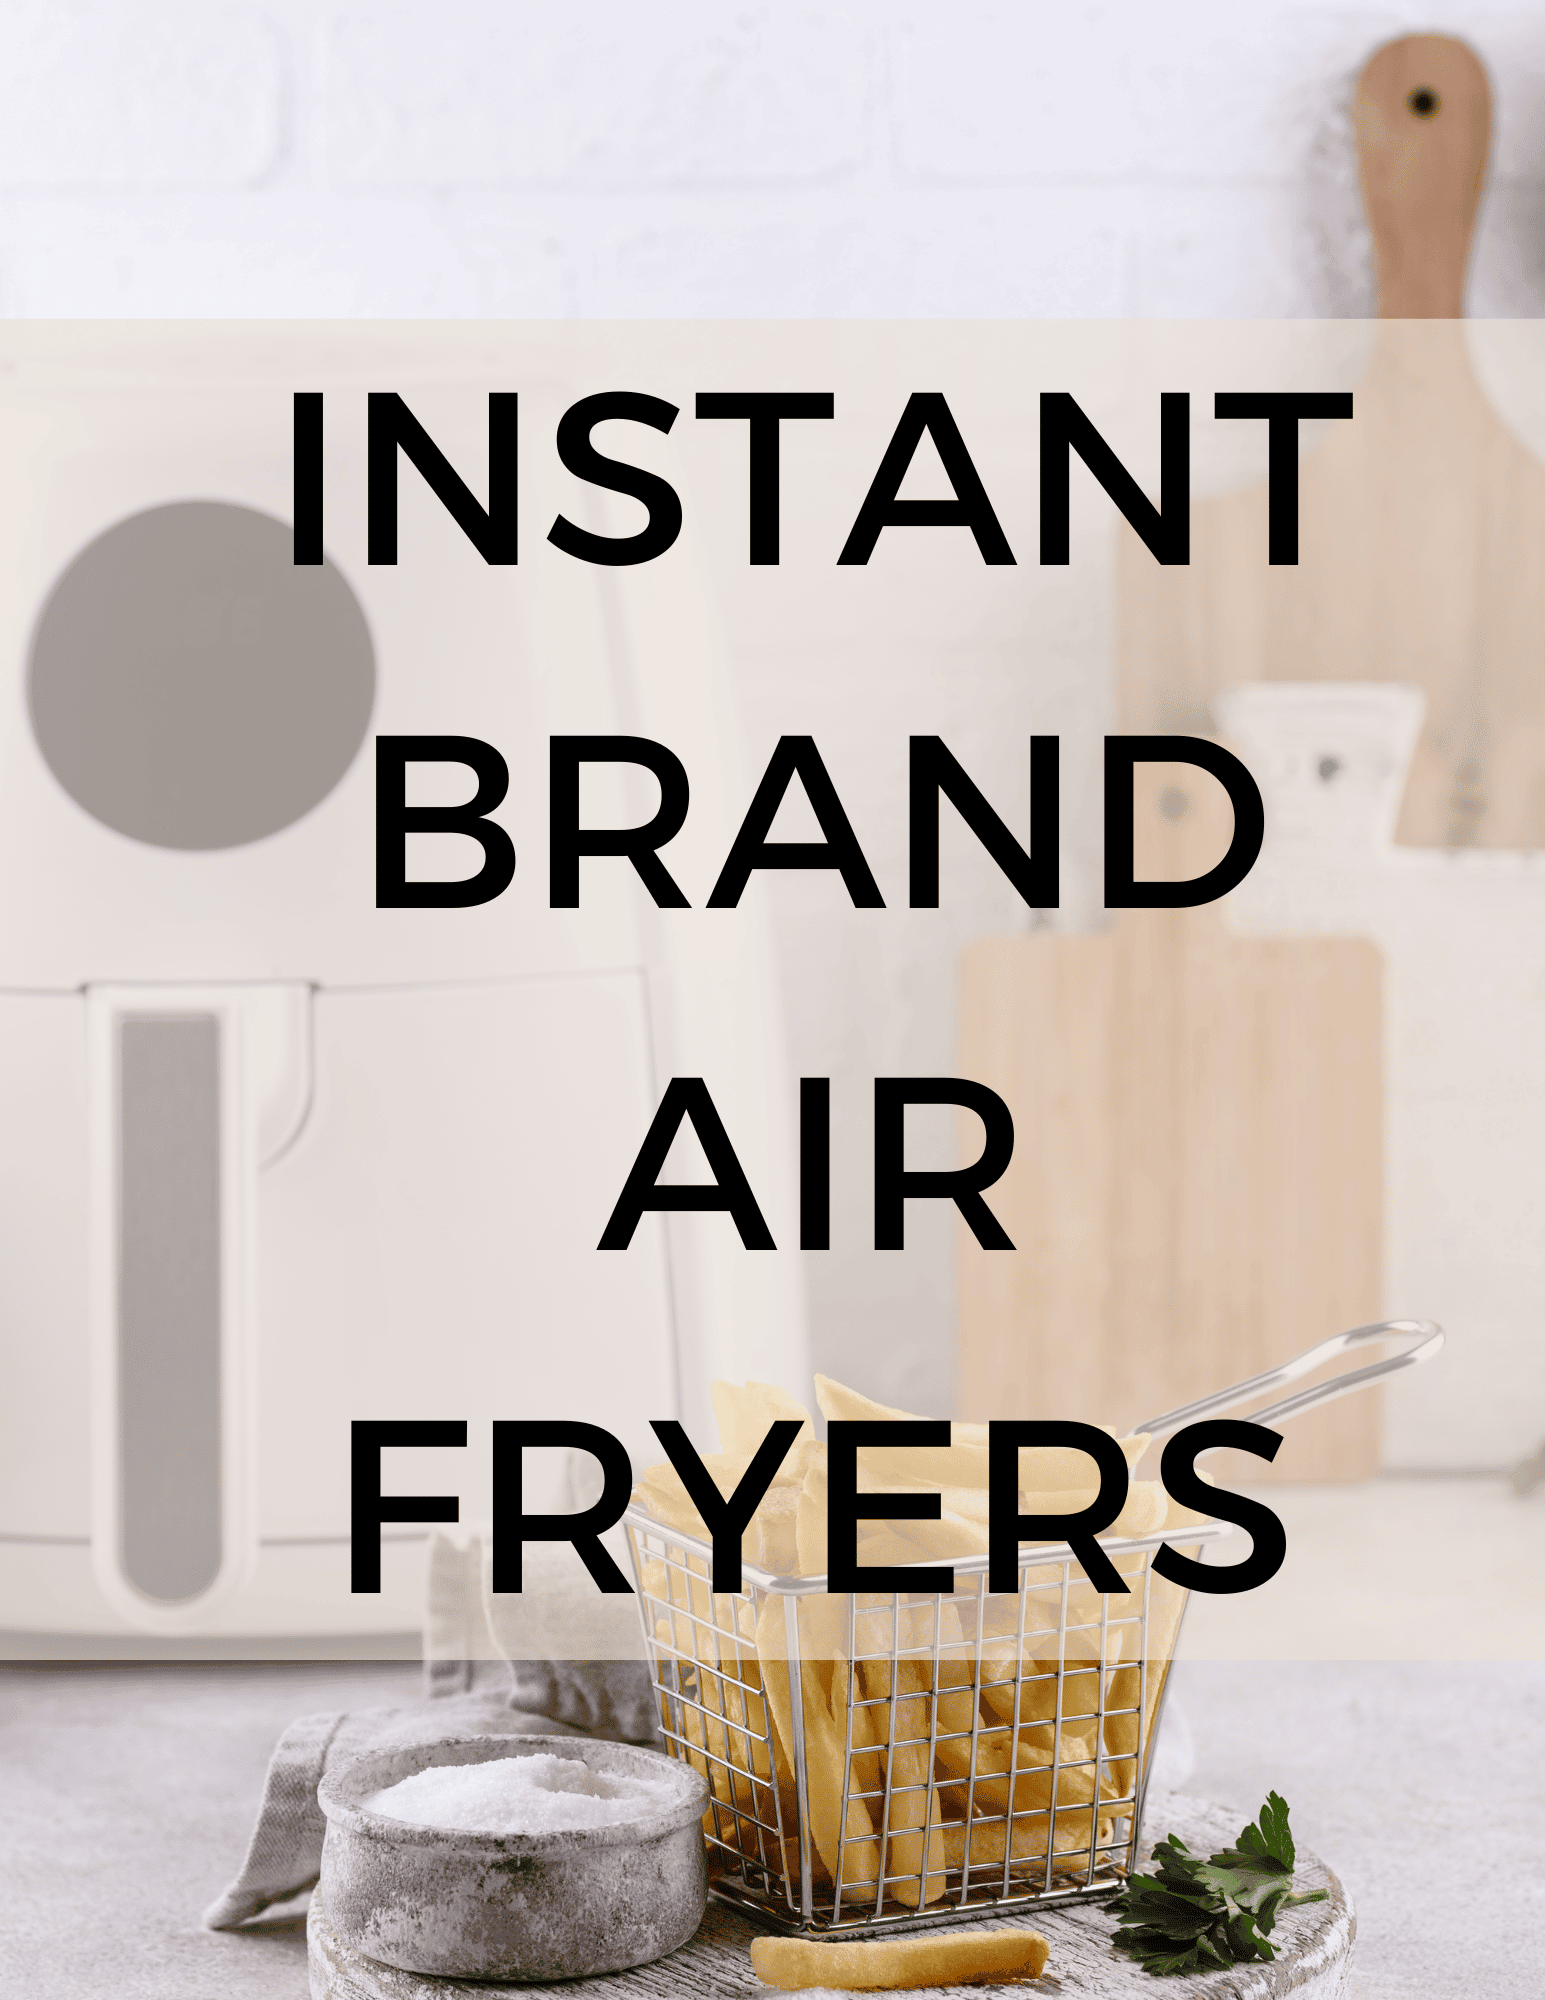 INSTANT BRAND AIR FRYERS